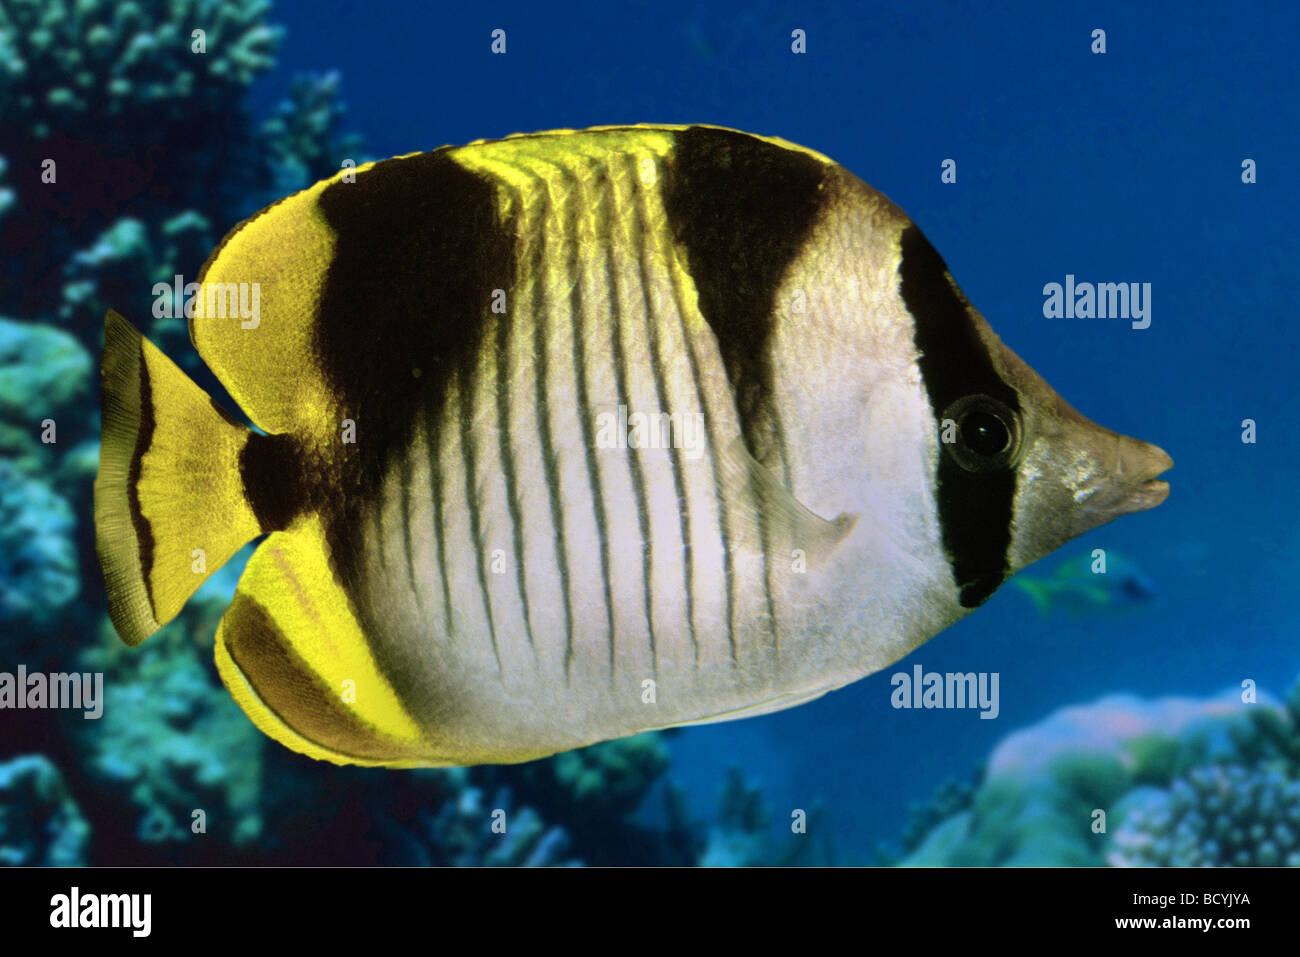 Blackwedged butterflyfish (Chaetodon falcula). Adult under water Stock Photo